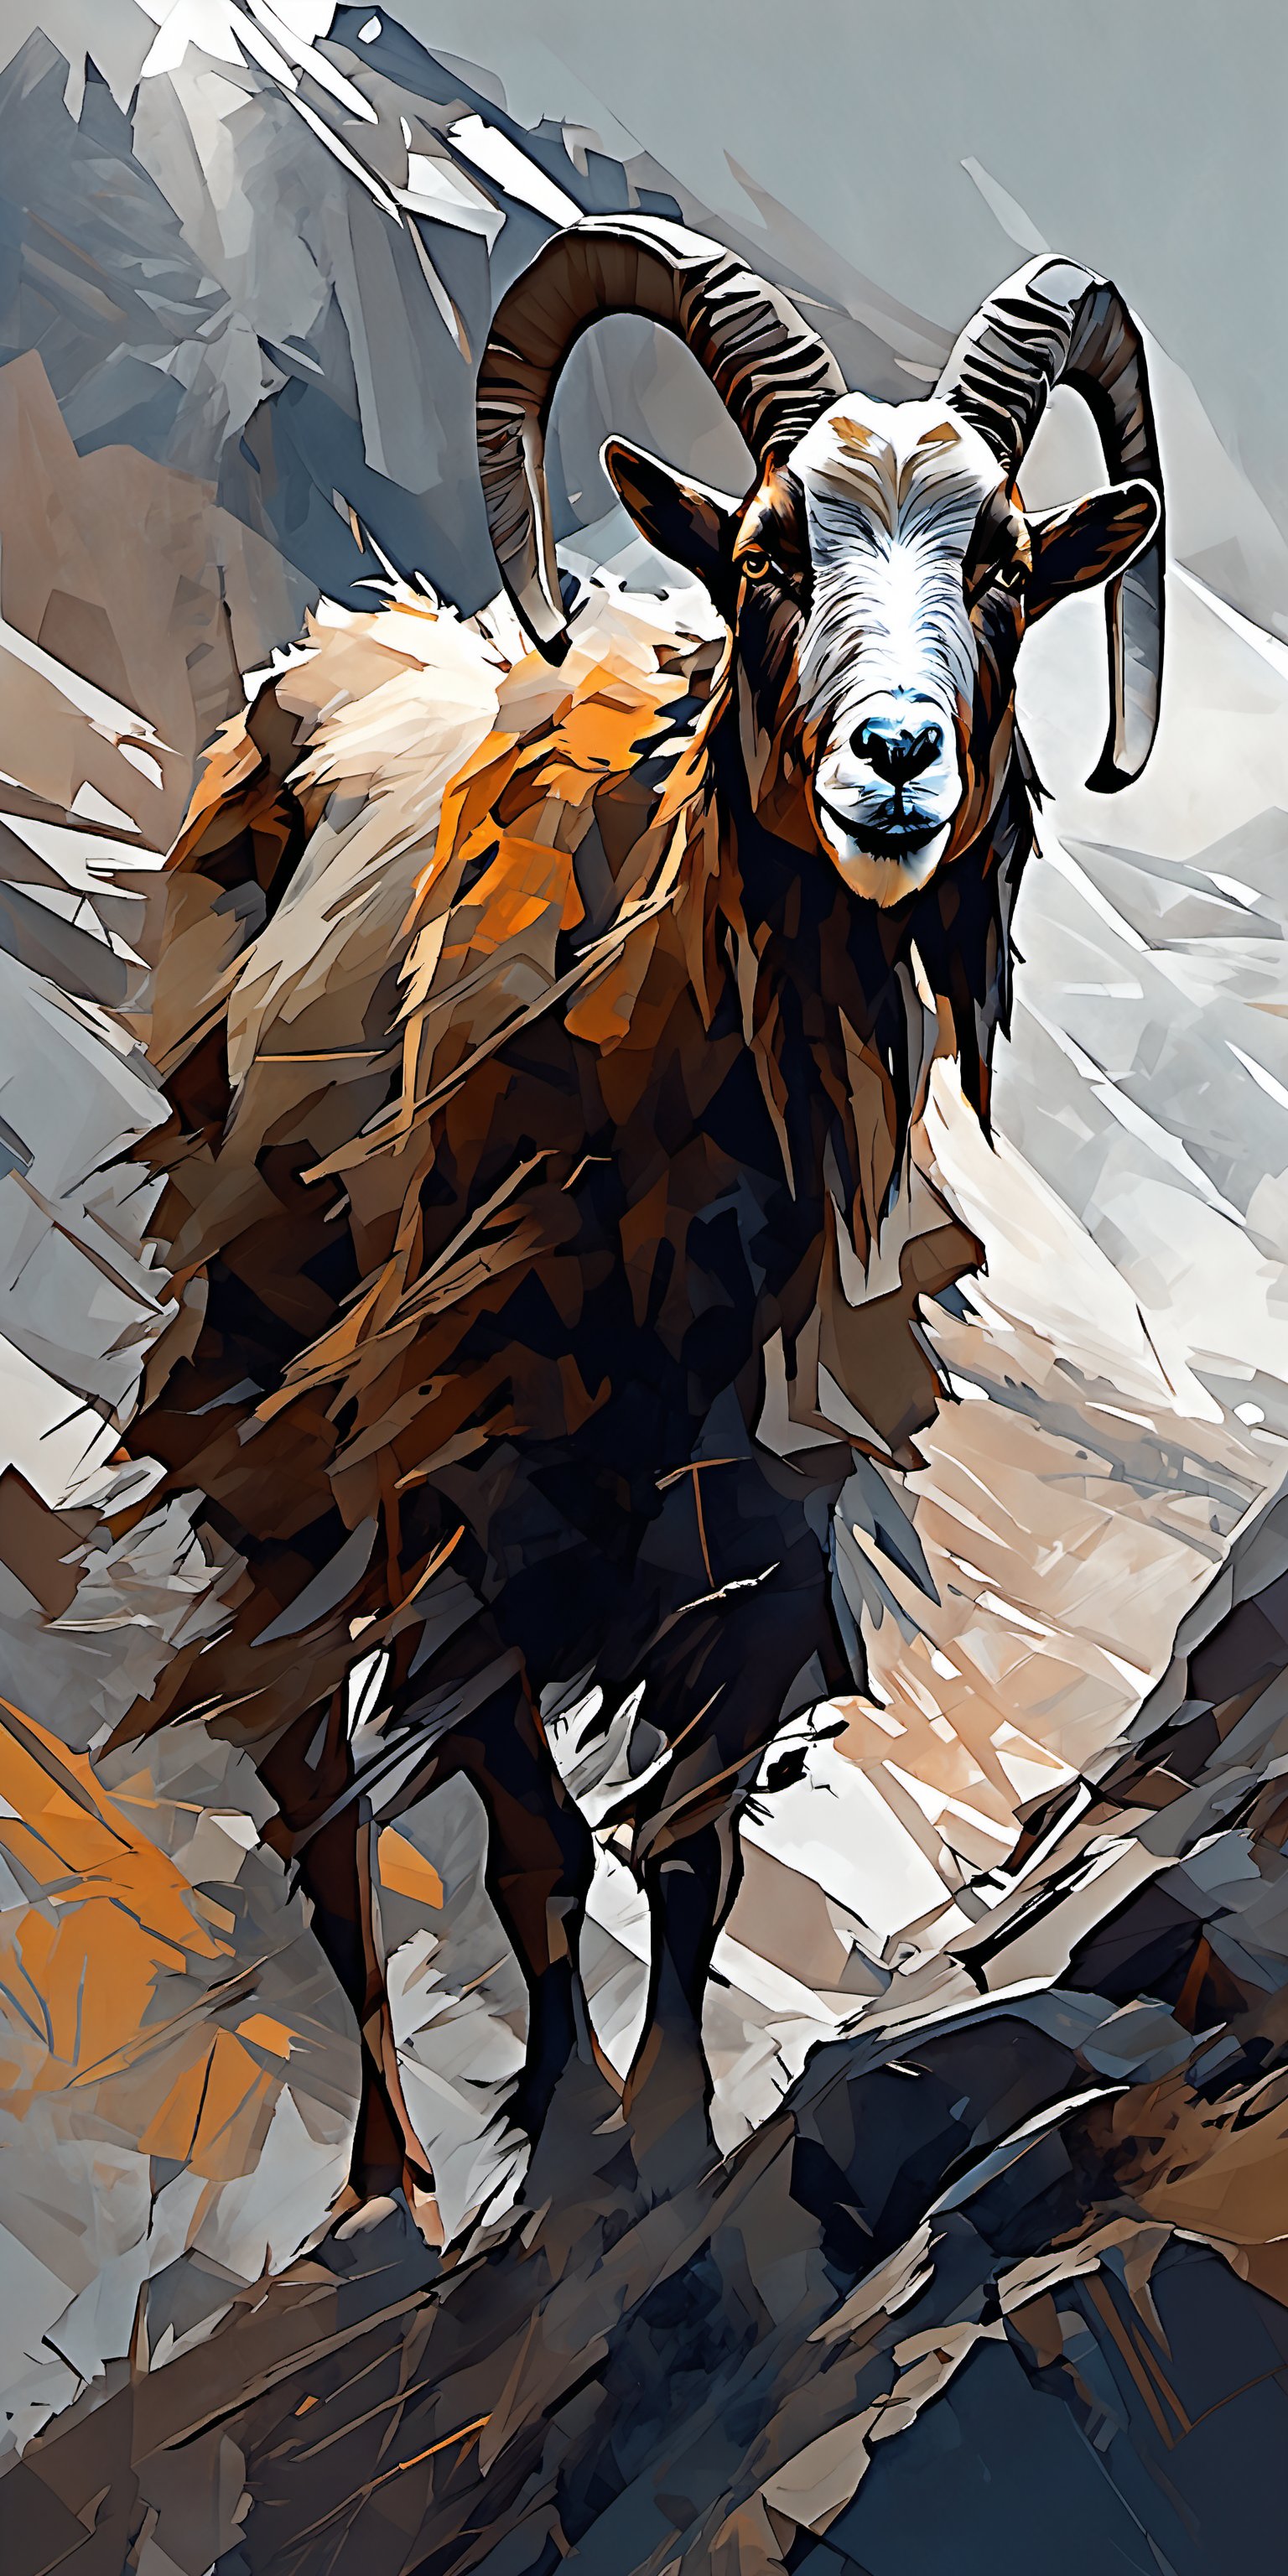 "Imaginative and hyperrealistic depiction of the ripped, tattered, and battle-worn appearance of a mountain goat, characterized by intricate line work and dynamic composition. Color palette blends muted, earthy tones with vibrant accents, enhancing the depth and atmosphere of the scene. The scene should feature a selective focus on the mountain goat. In contrast, the background should transition into an abstract, painterly environment. The atmosphere should be hazy and diffuse, contributing to an ethereal and somewhat dystopian feel. Indistinct forms and shapes in the background should suggest a mountain landscape, rendered in a loose, impressionistic style to emphasize mood and atmosphere over detailed realism."